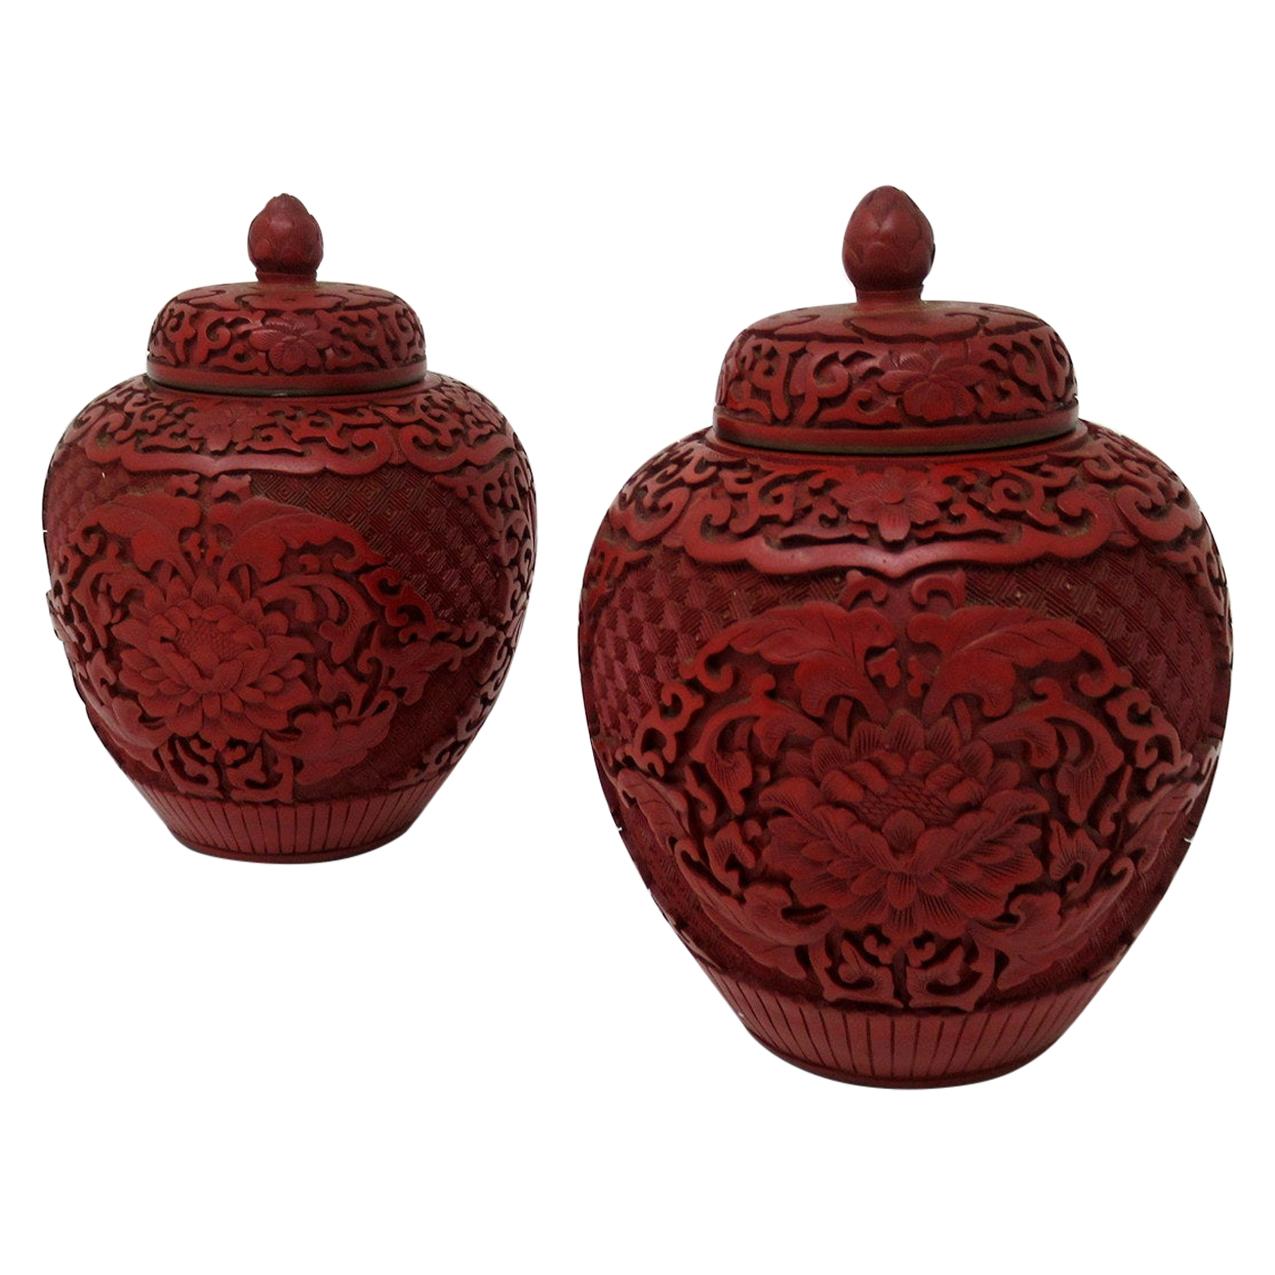 Pair of Antique Chinese Carved Cinnabar Bowls Ginger Jars Guangxu, 19th Century